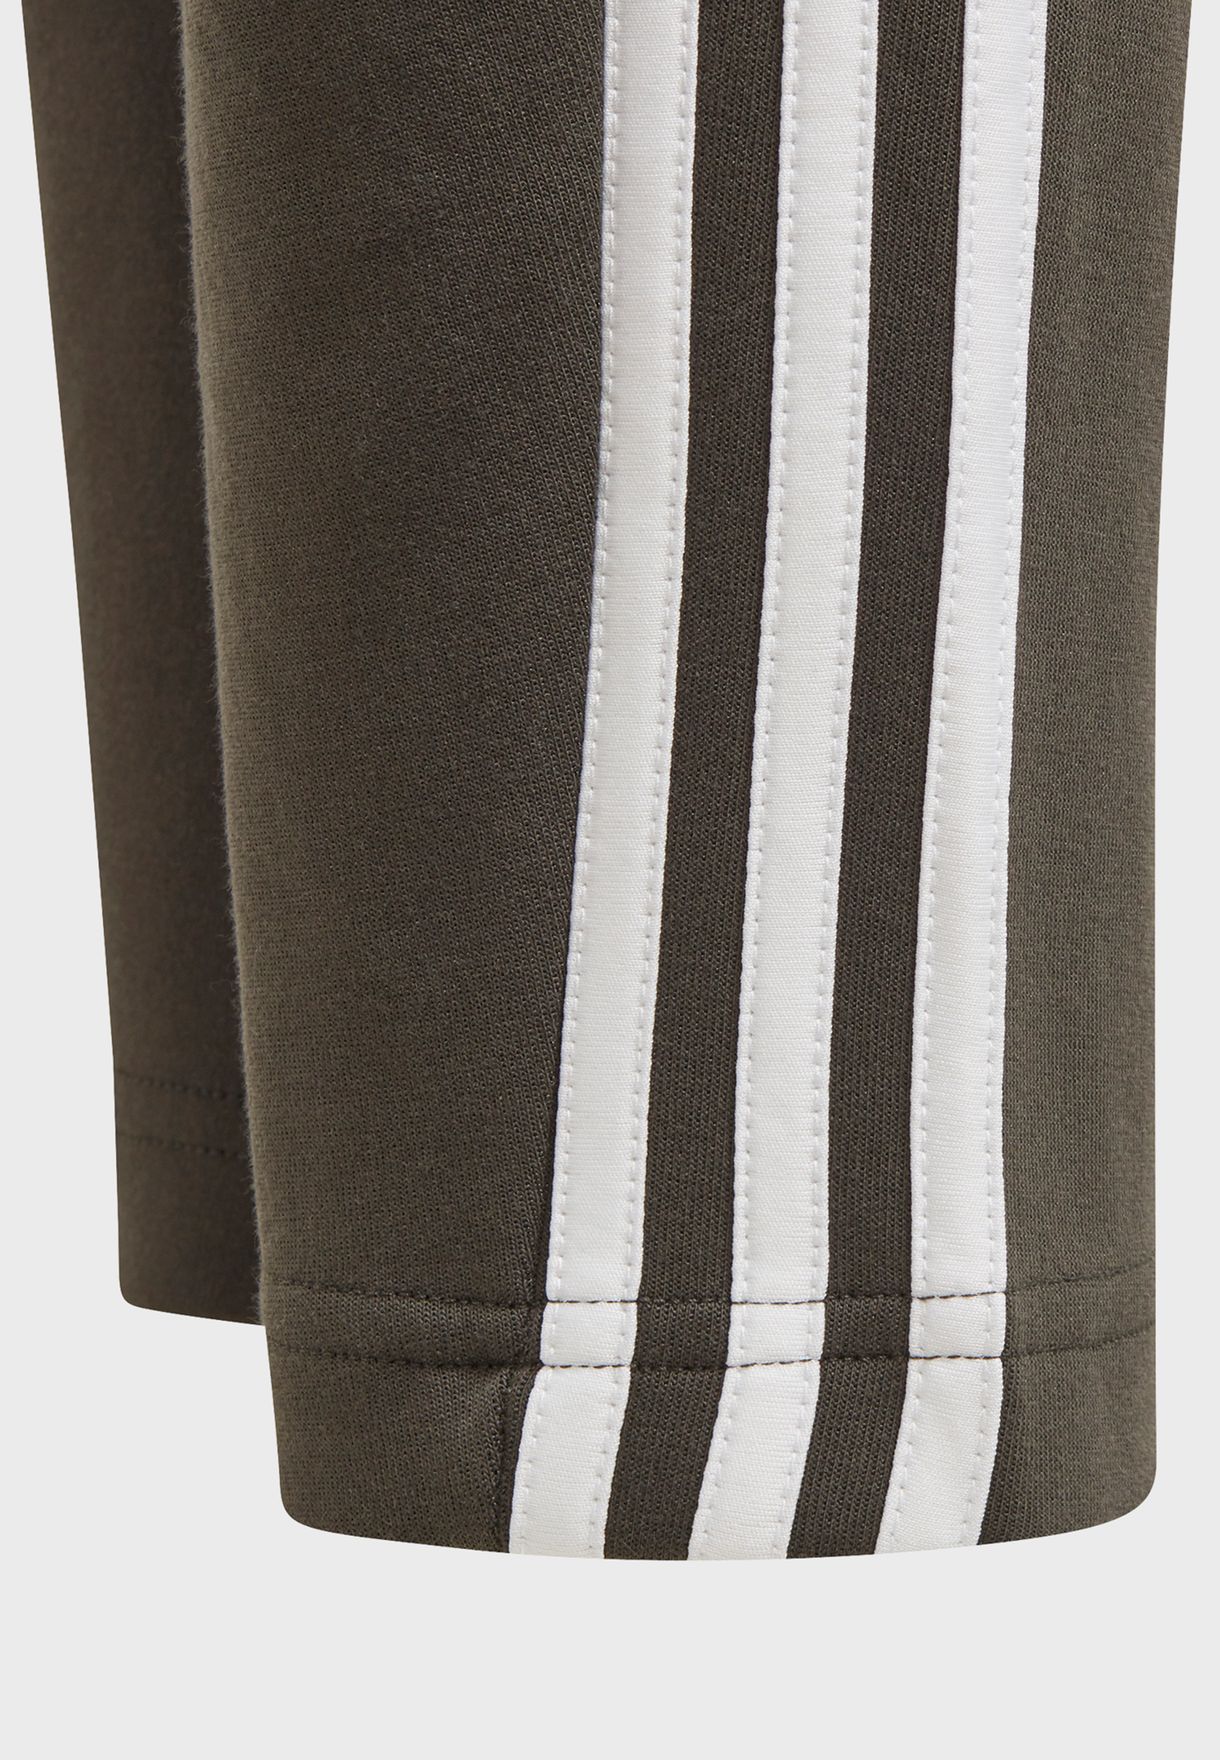 Youth 3 Stripe Tapered Sweatpants